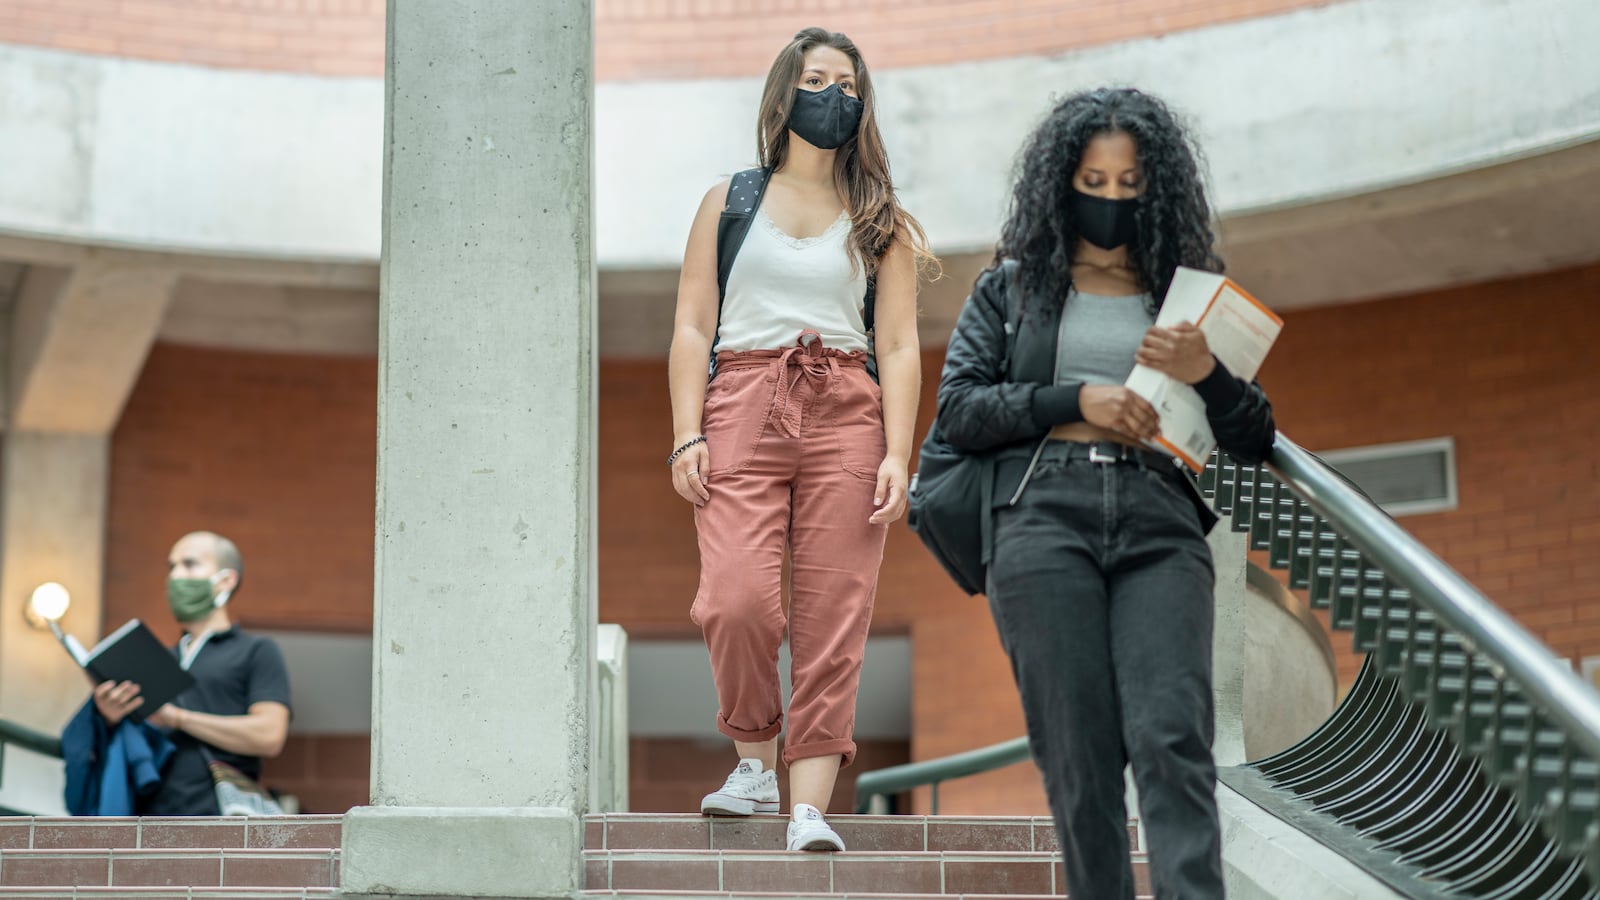 A group of college students wearing protective face masks walk down steps inside a university building.